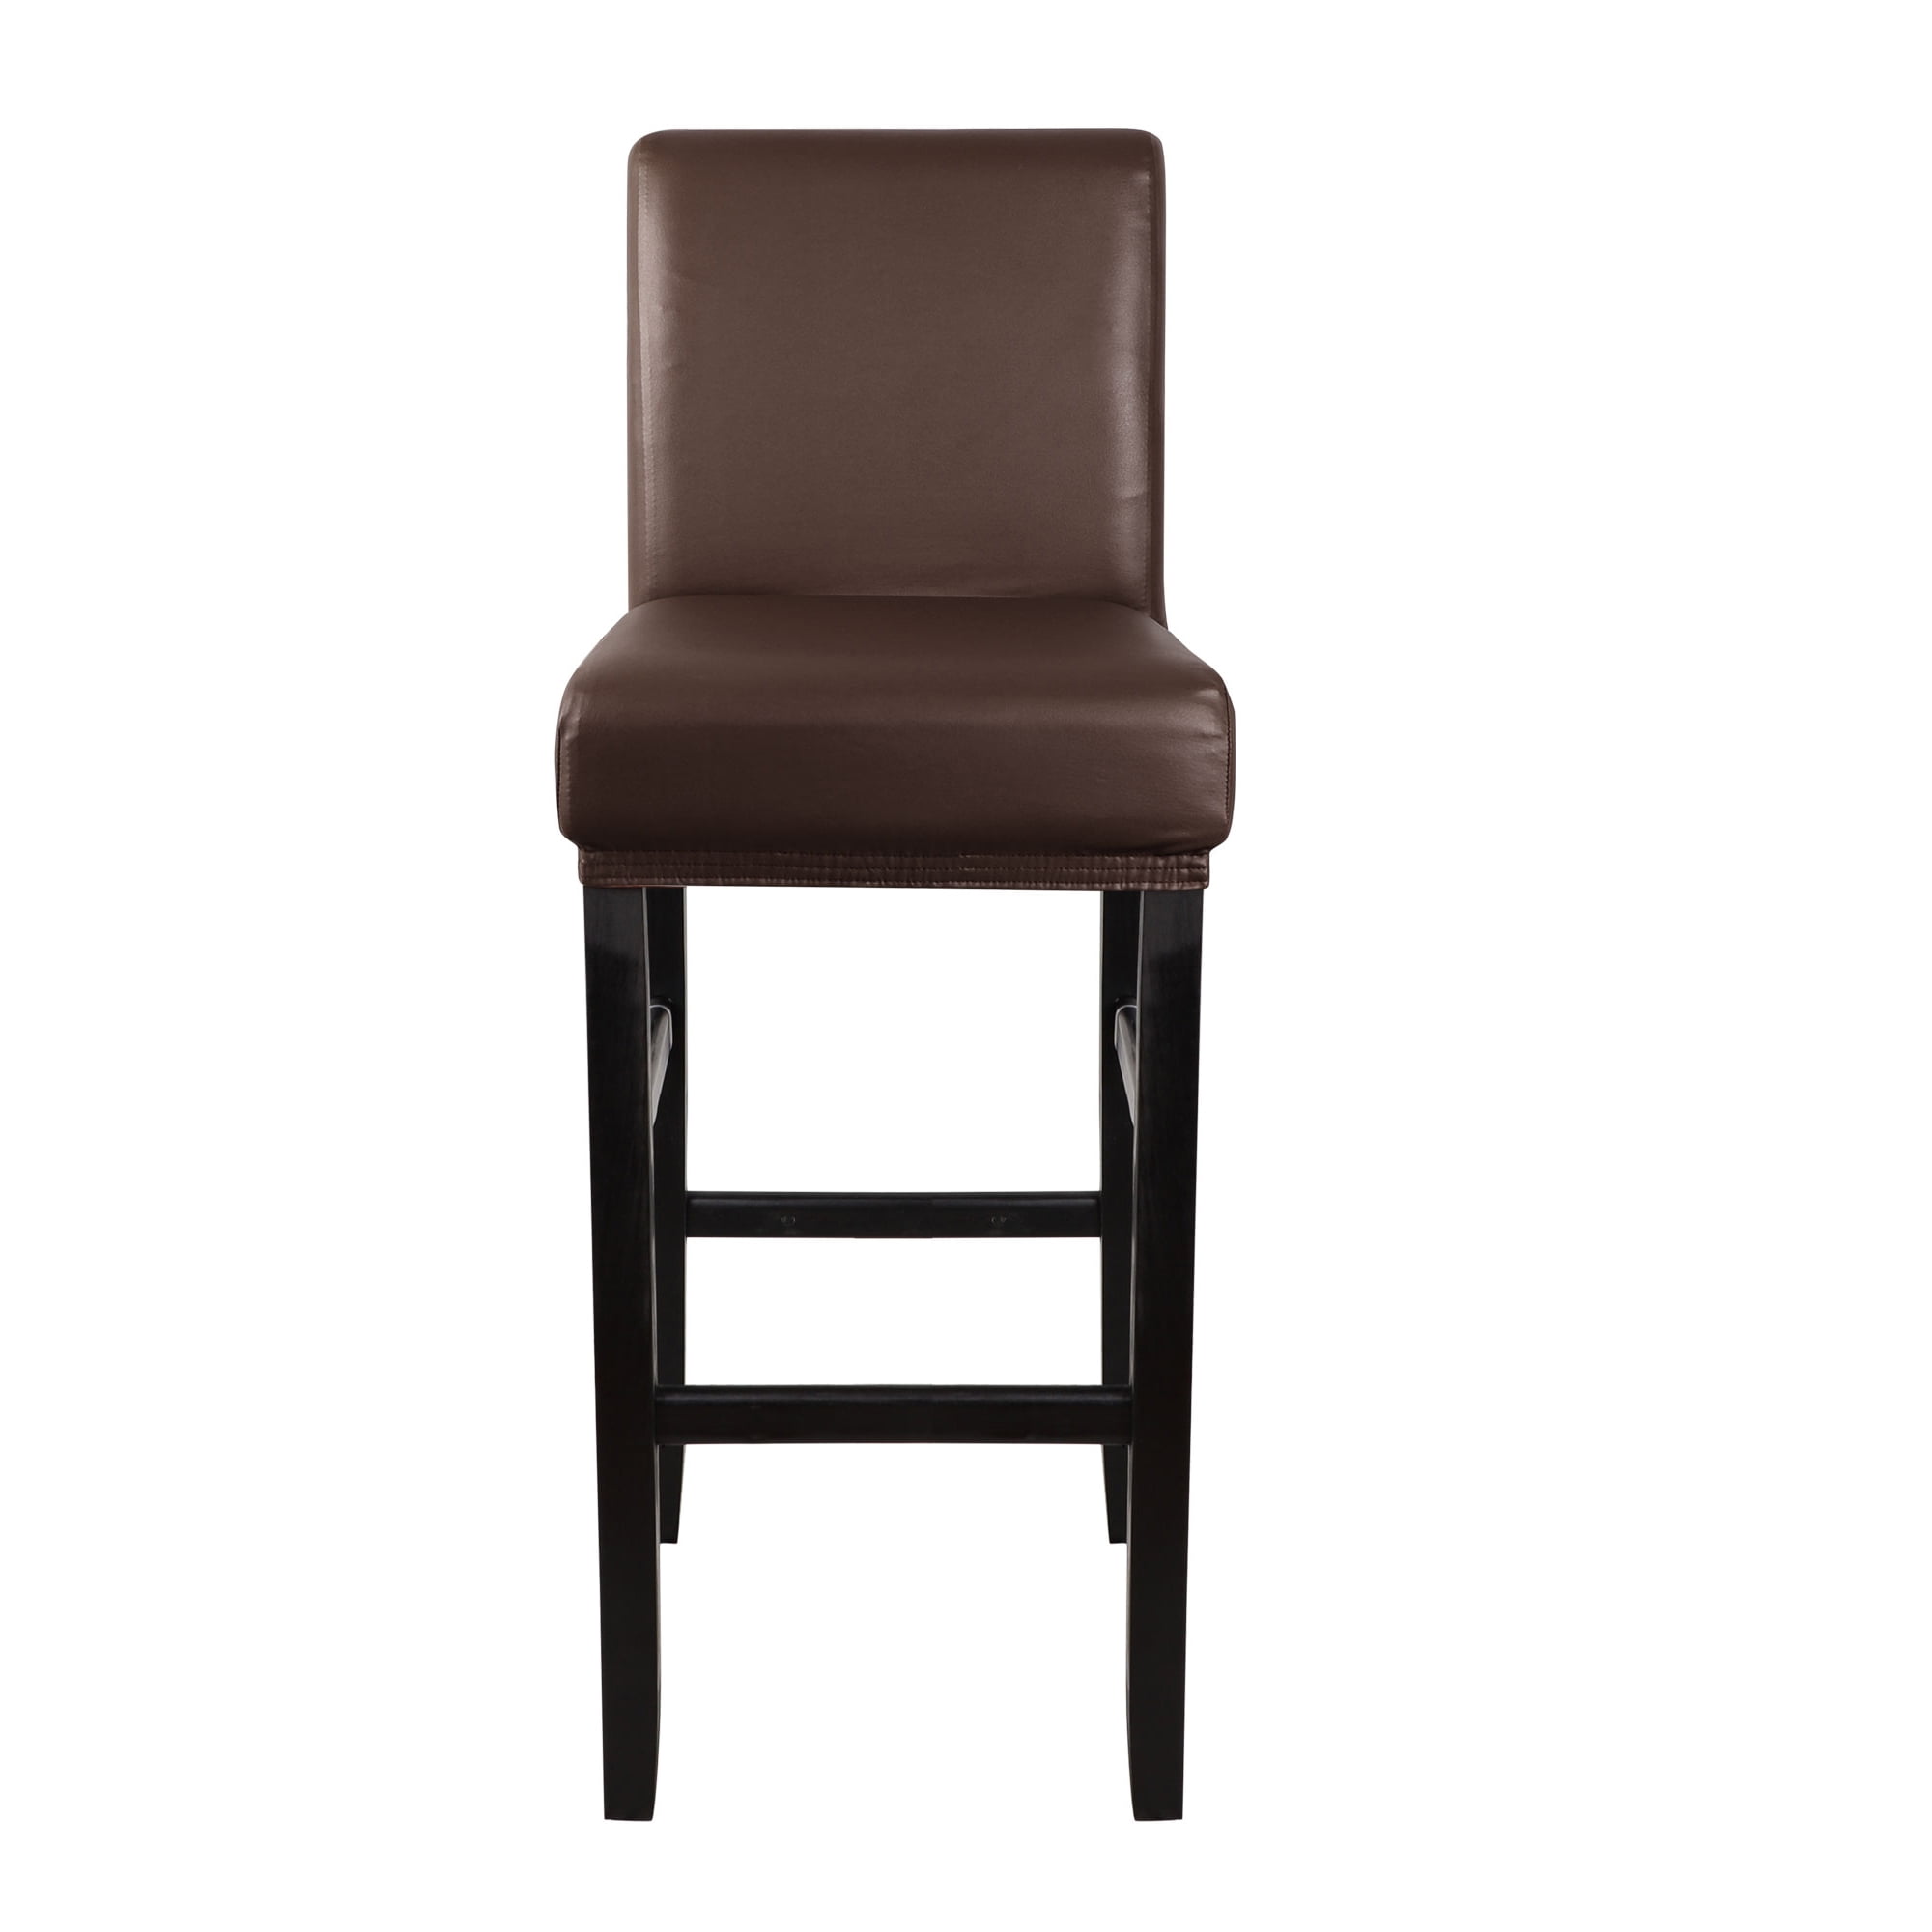 Details about   1-4x Armless Chair Cover Bar Stool Slipcovers Pub Cafe Restaurant  Seat Covers 